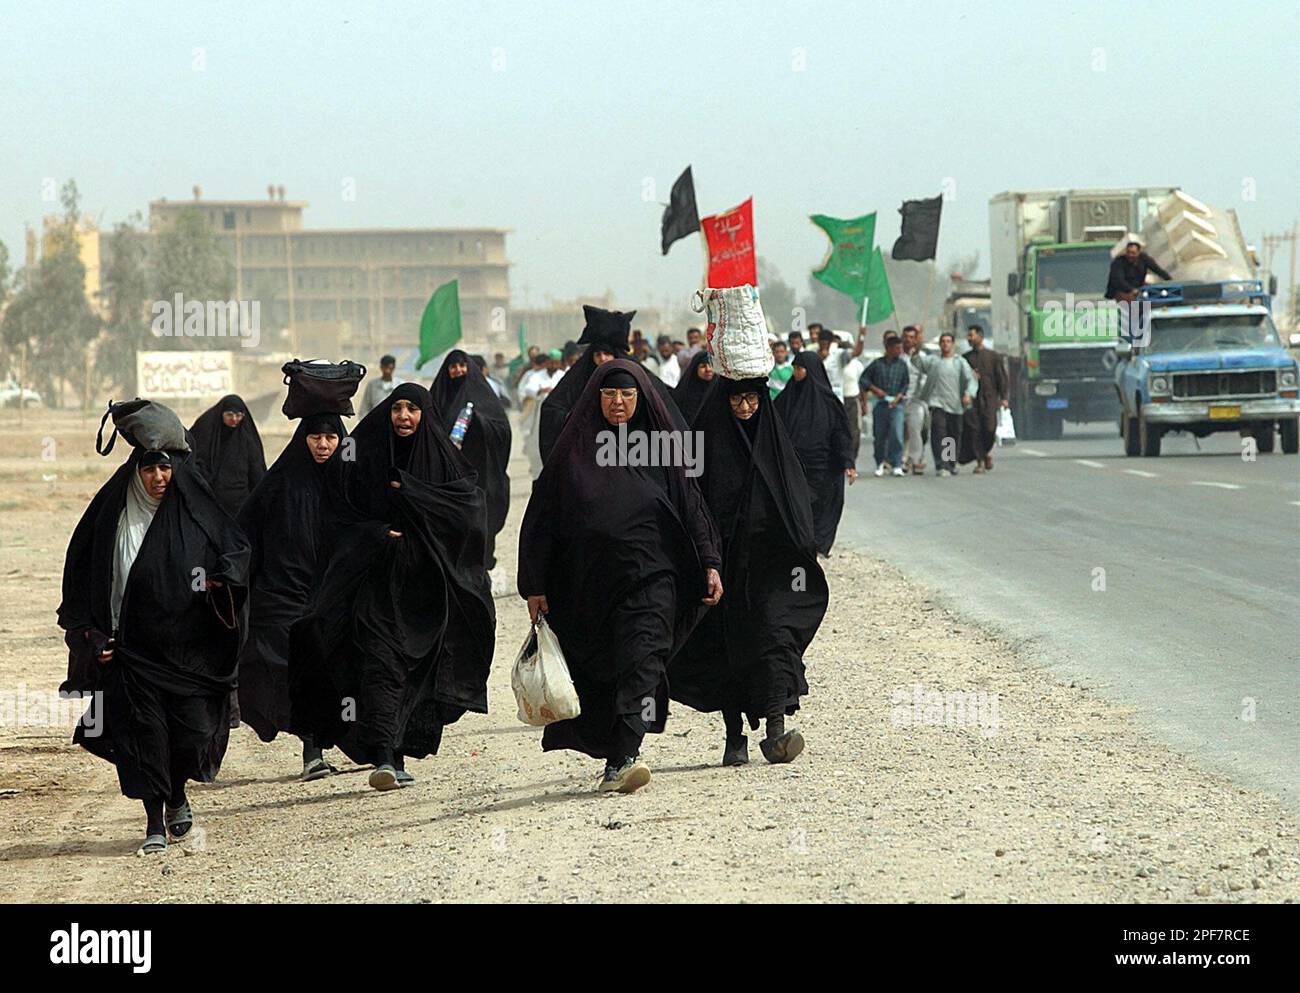 Iraqi Shiite Muslim women walk in front of men carrying flags with  religious slogans, on the highway linking Baghdad with the southern city of  Karbala on Saturday, April 19, 2003. For the